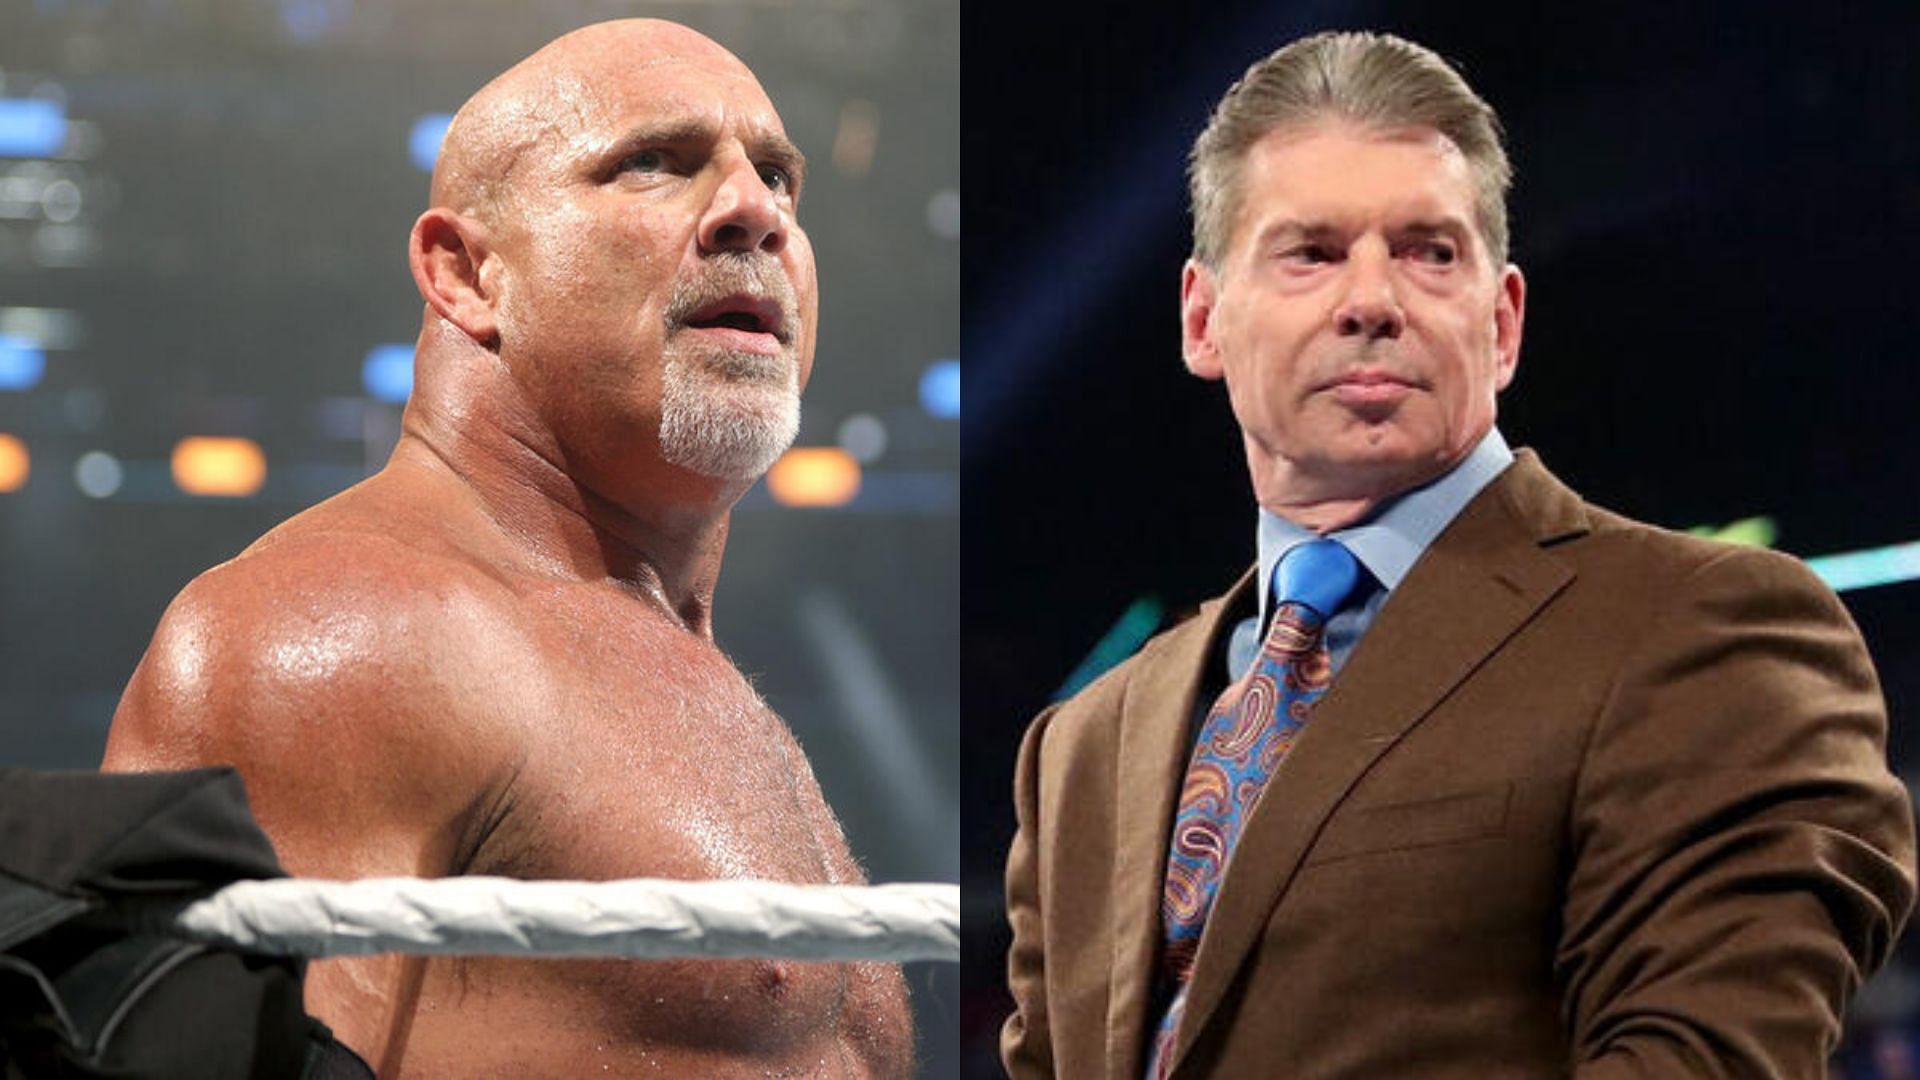 Goldberg and Vince McMahon have had their differences in the past (Credit: WWE)